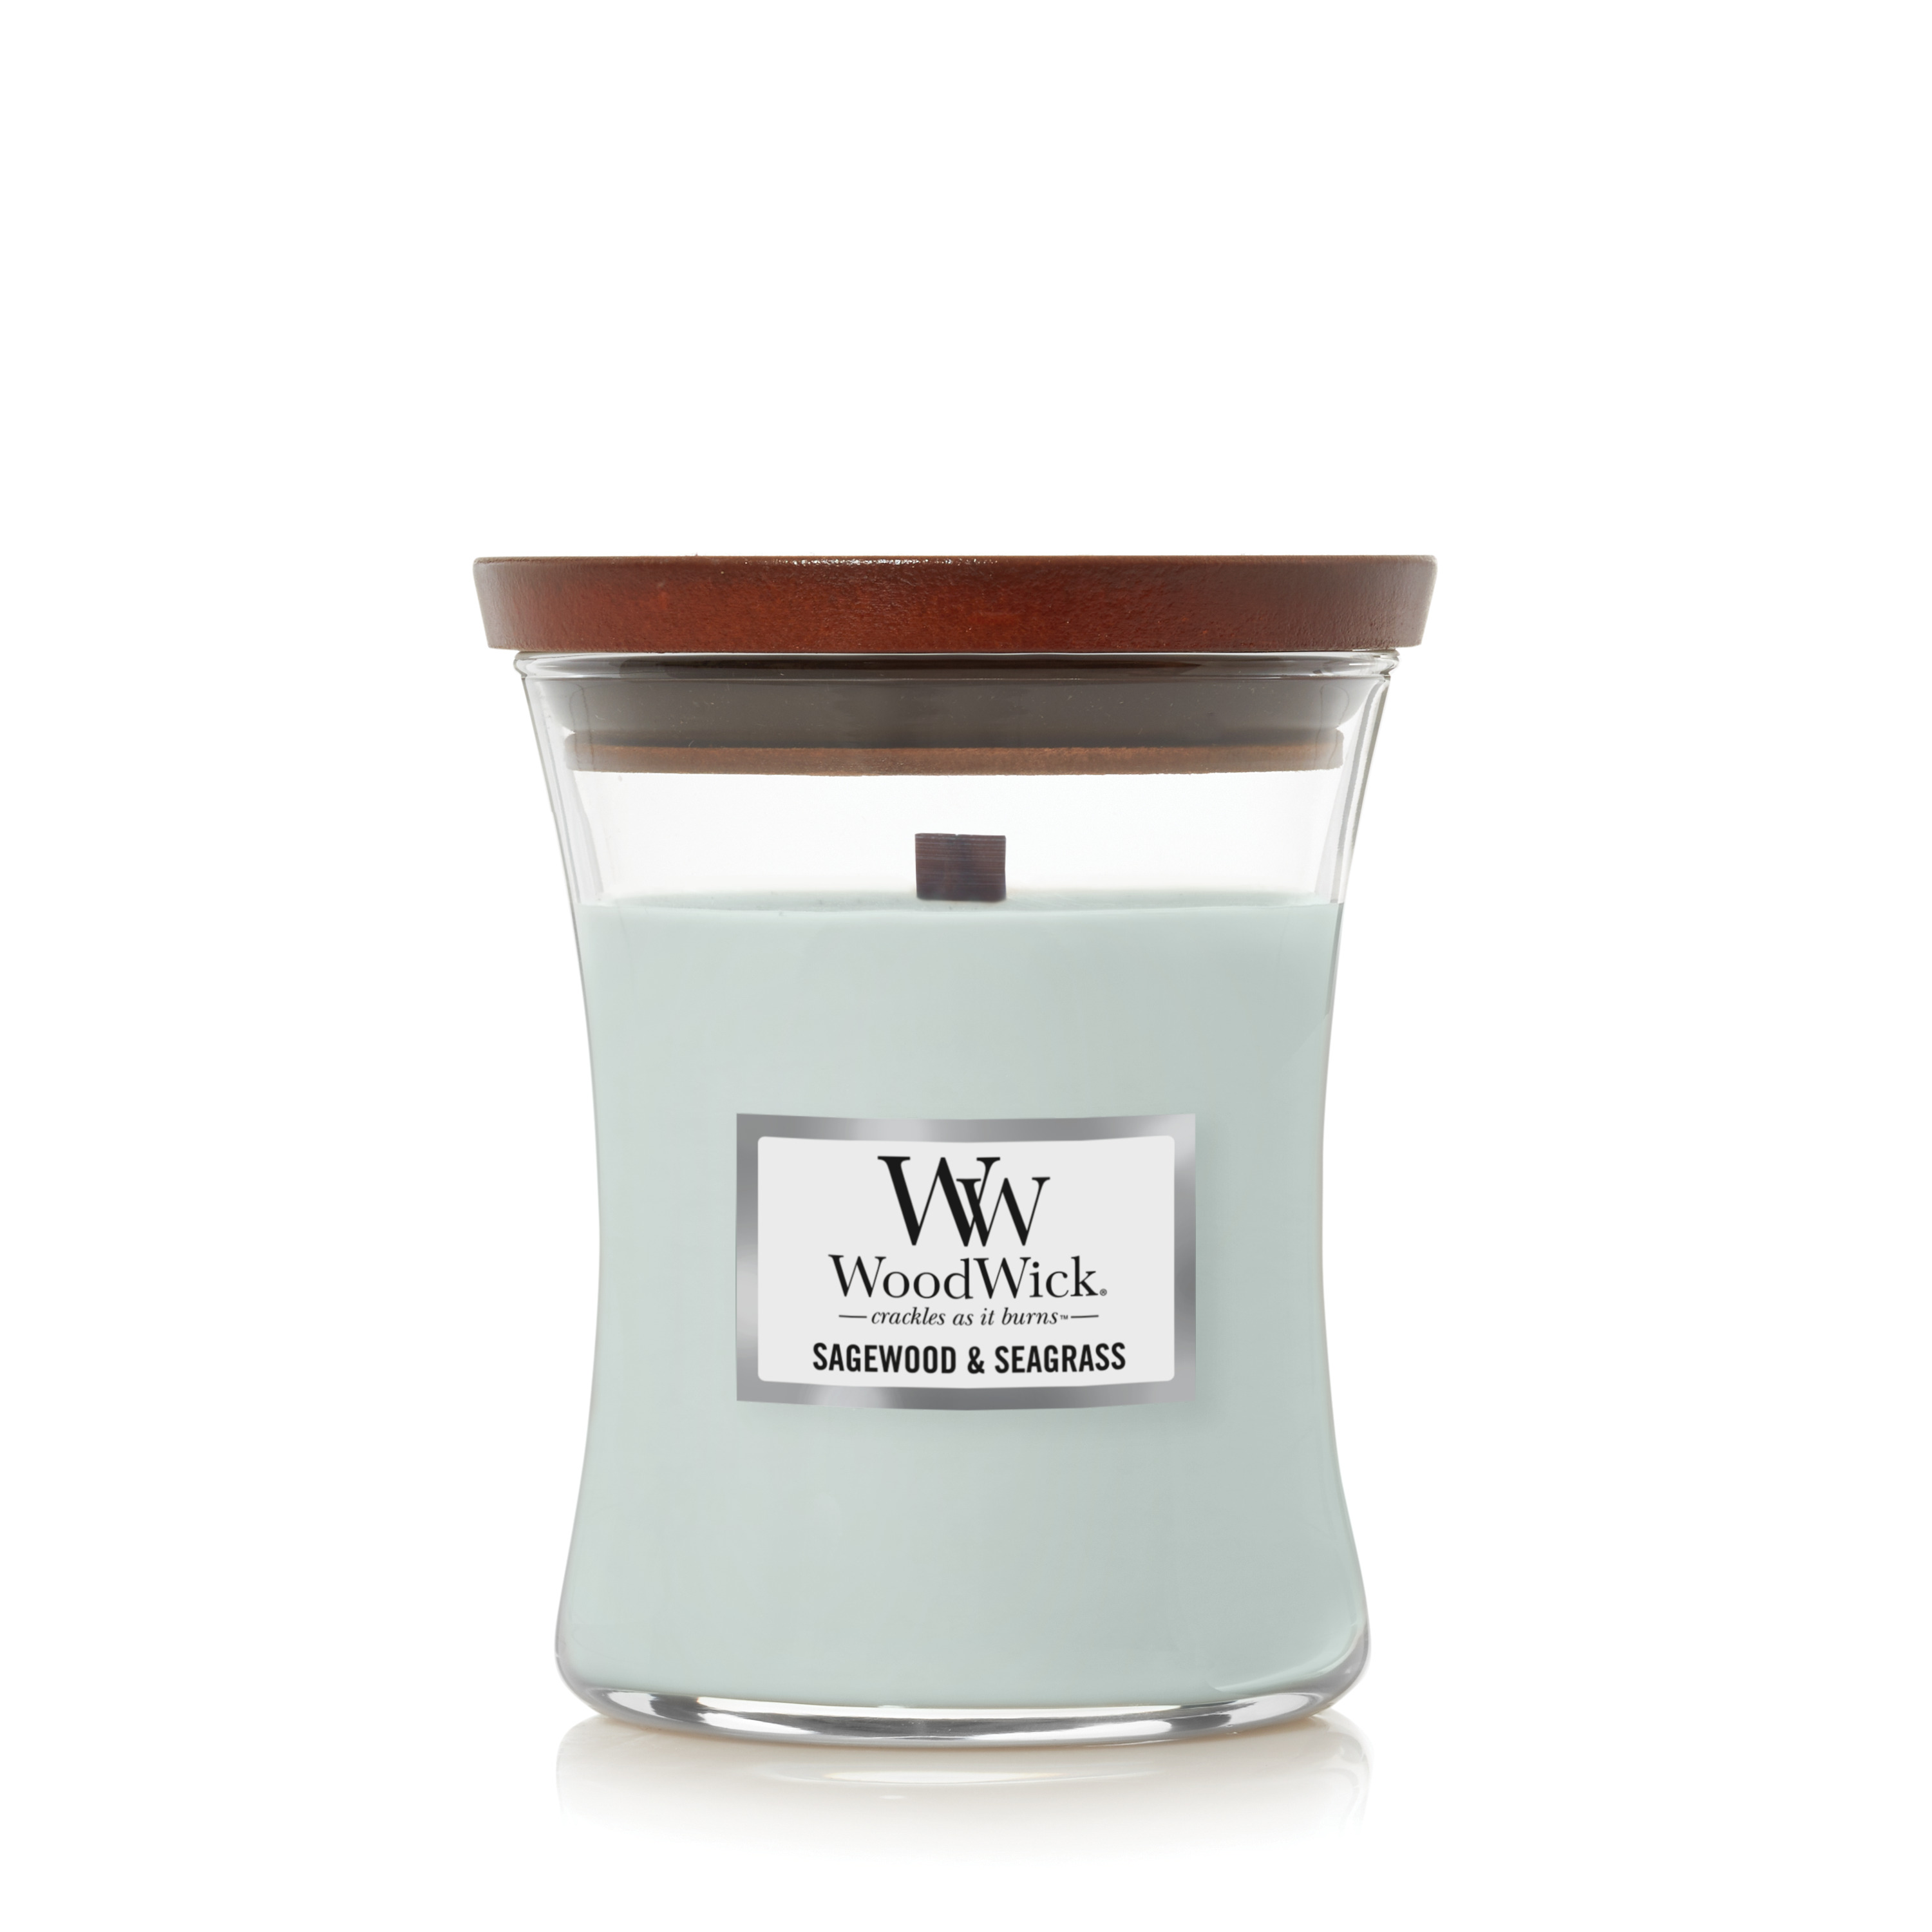 WoodWick Medium Hourglass Candle, Sagewood & Seagrass, 9.7 oz. - image 1 of 5